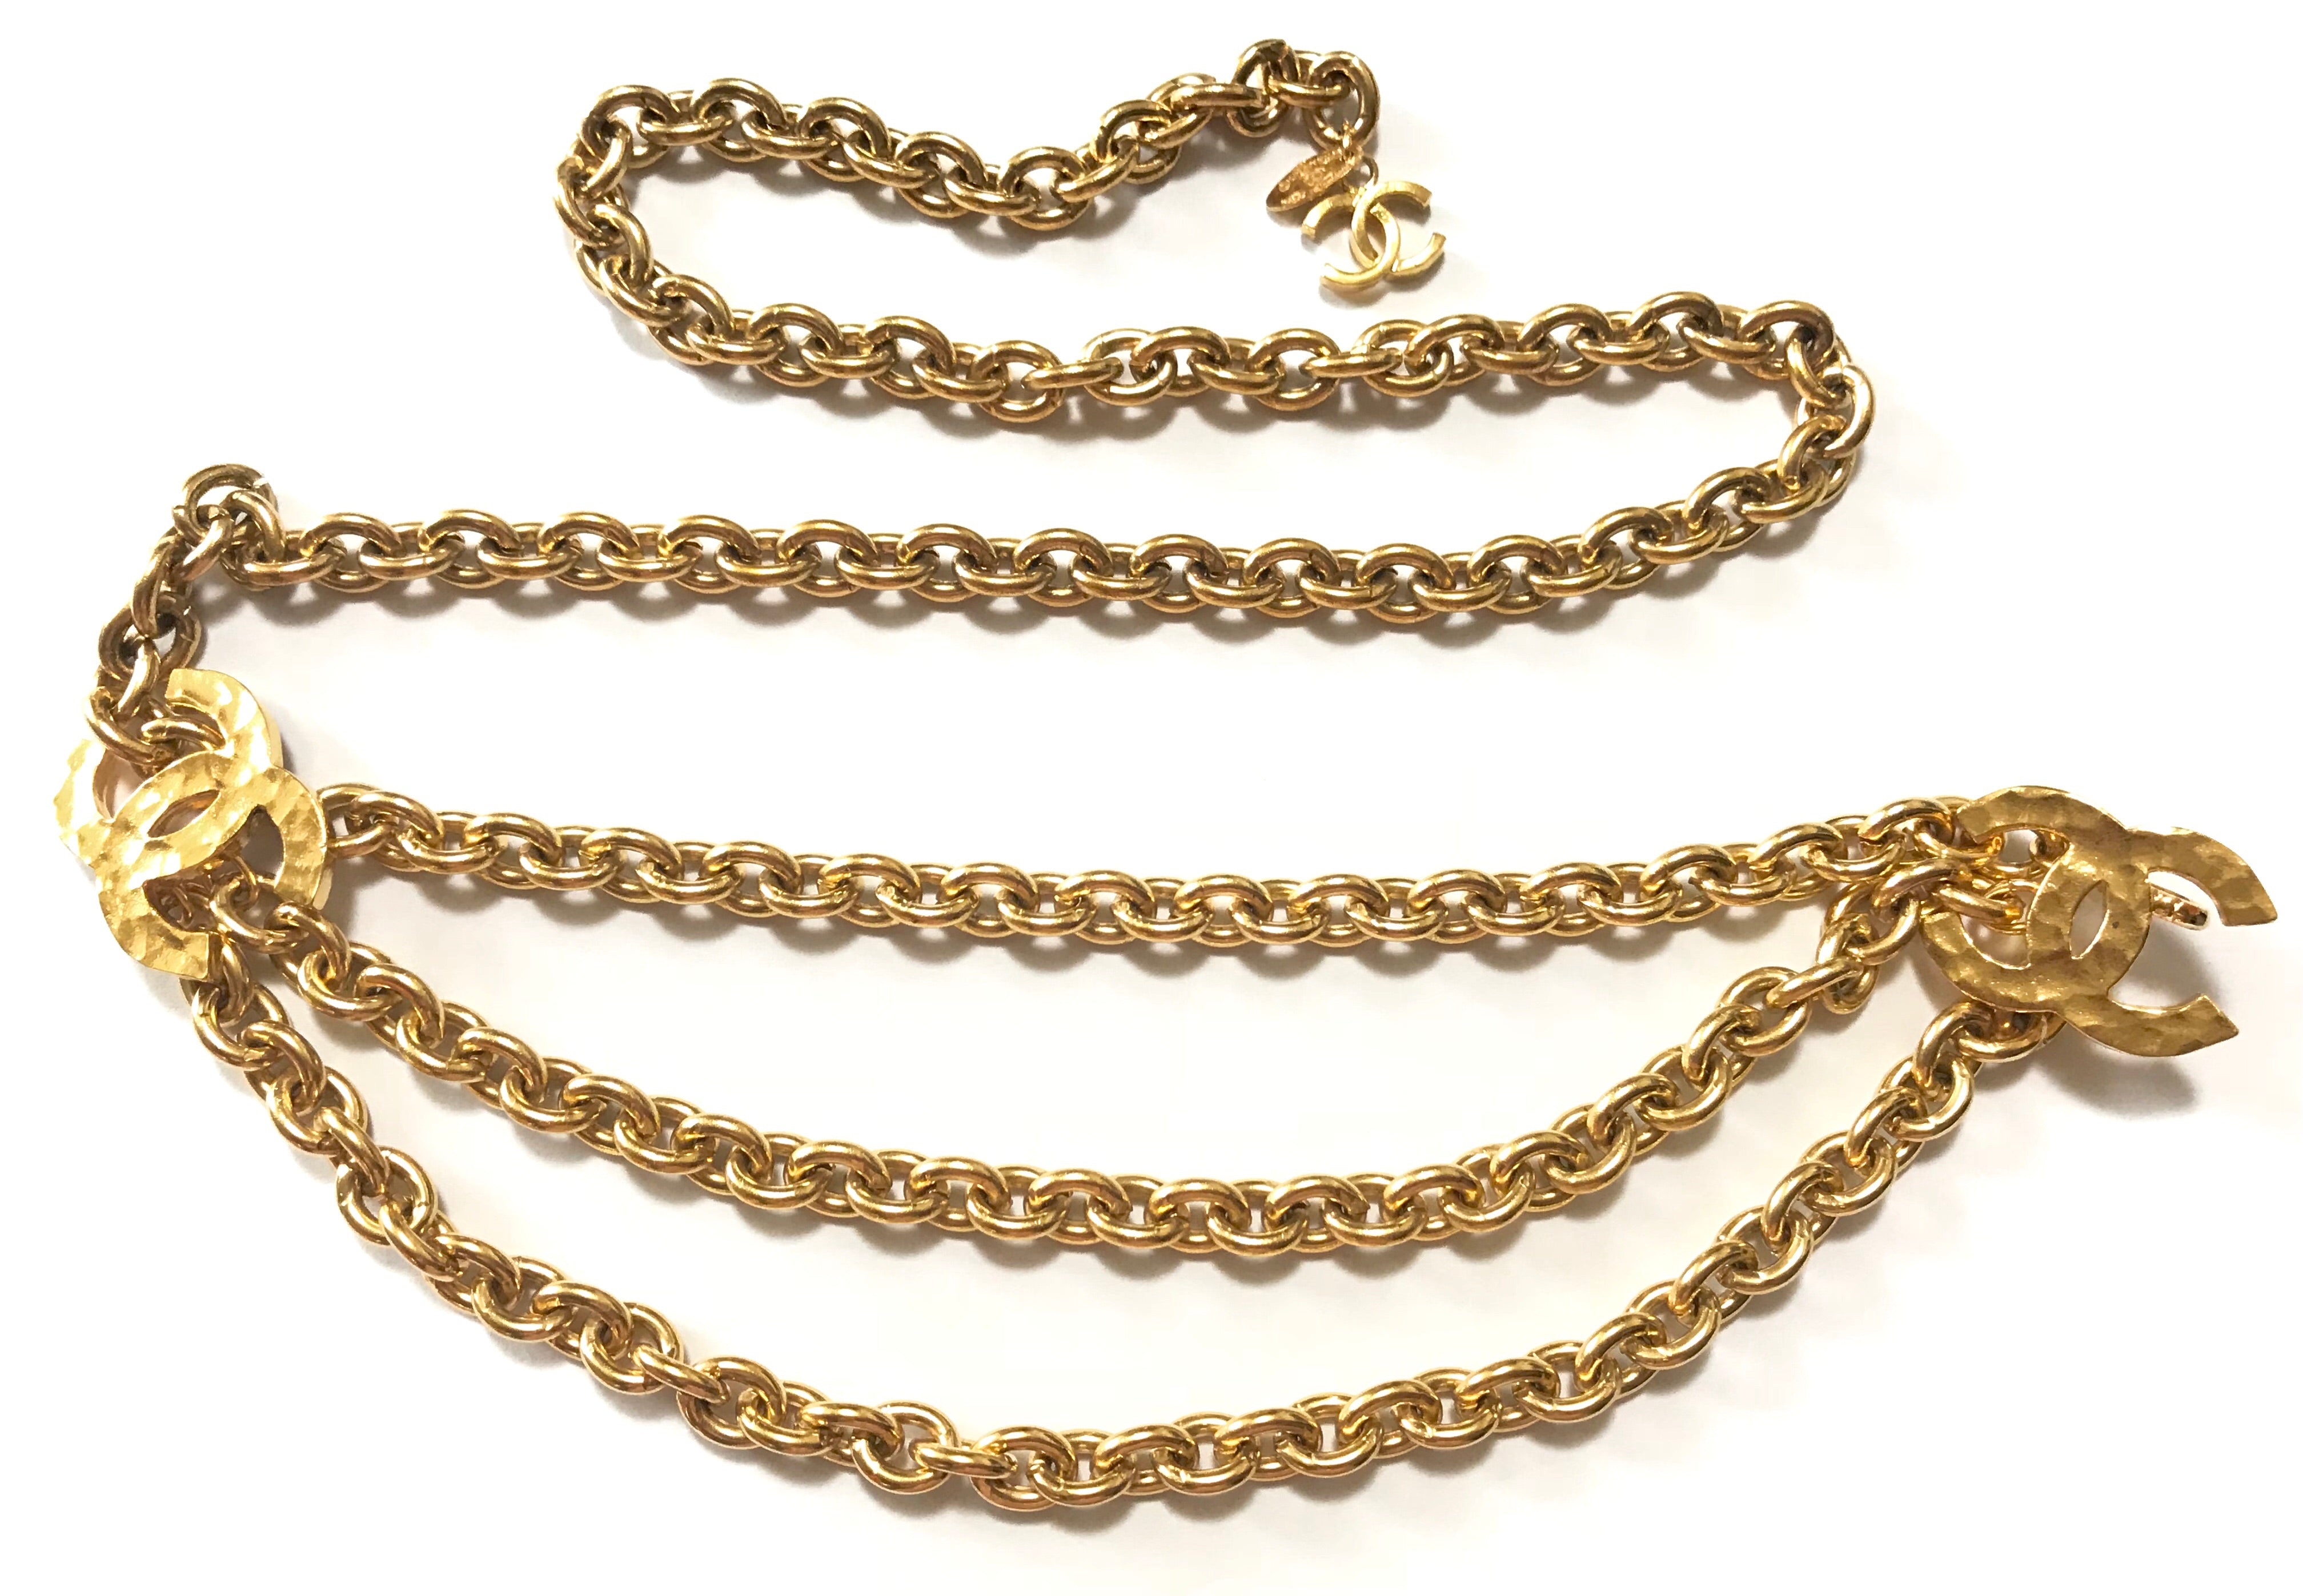 Vintage CHANEL gold chain belt with triple layer chains and two large CC mark charms at sides. Gorgeous belt. 72cm. R04101111る